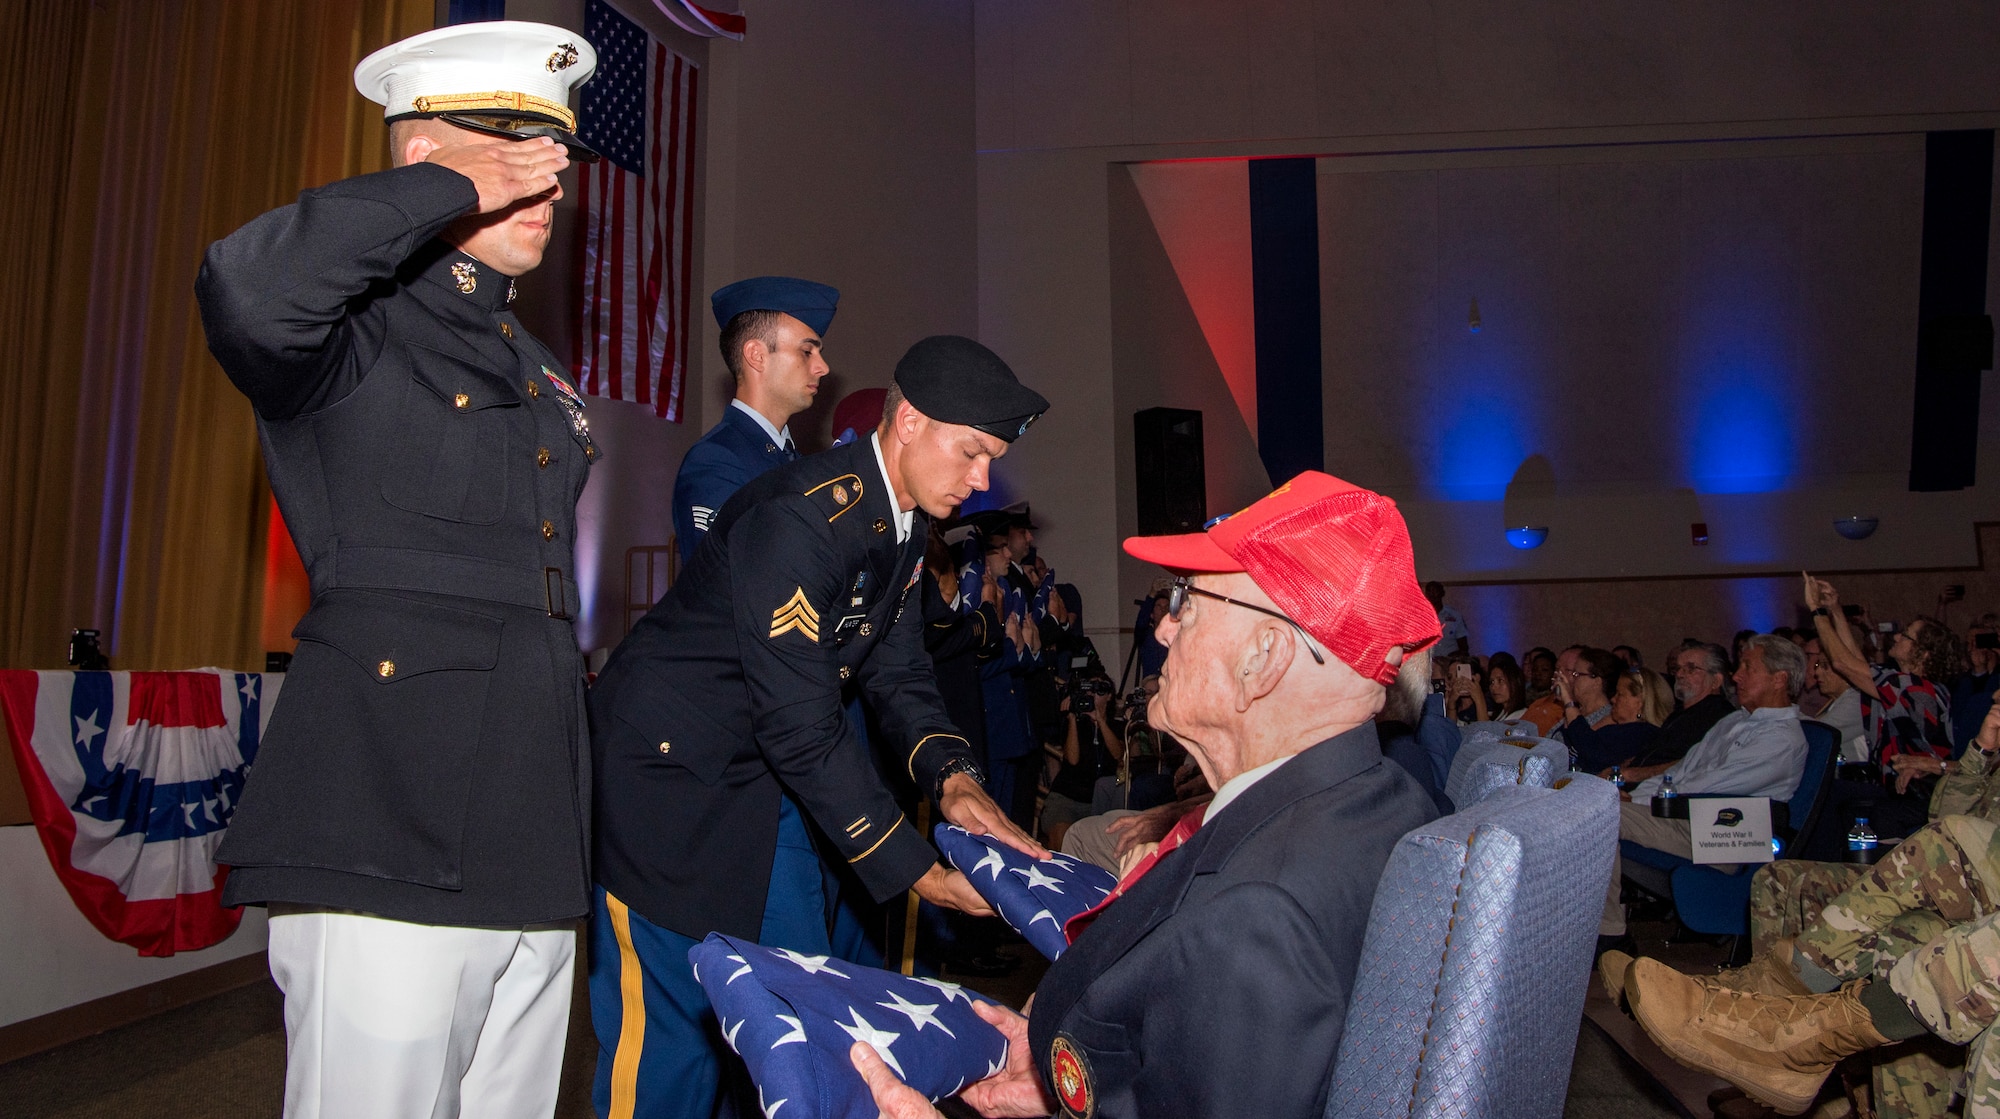 MacDill’s joint service members present a flag during the 75th D-Day Commemoration to each World War II veteran in attendance at MacDill Air Force Base, Fla., June 6, 2019.